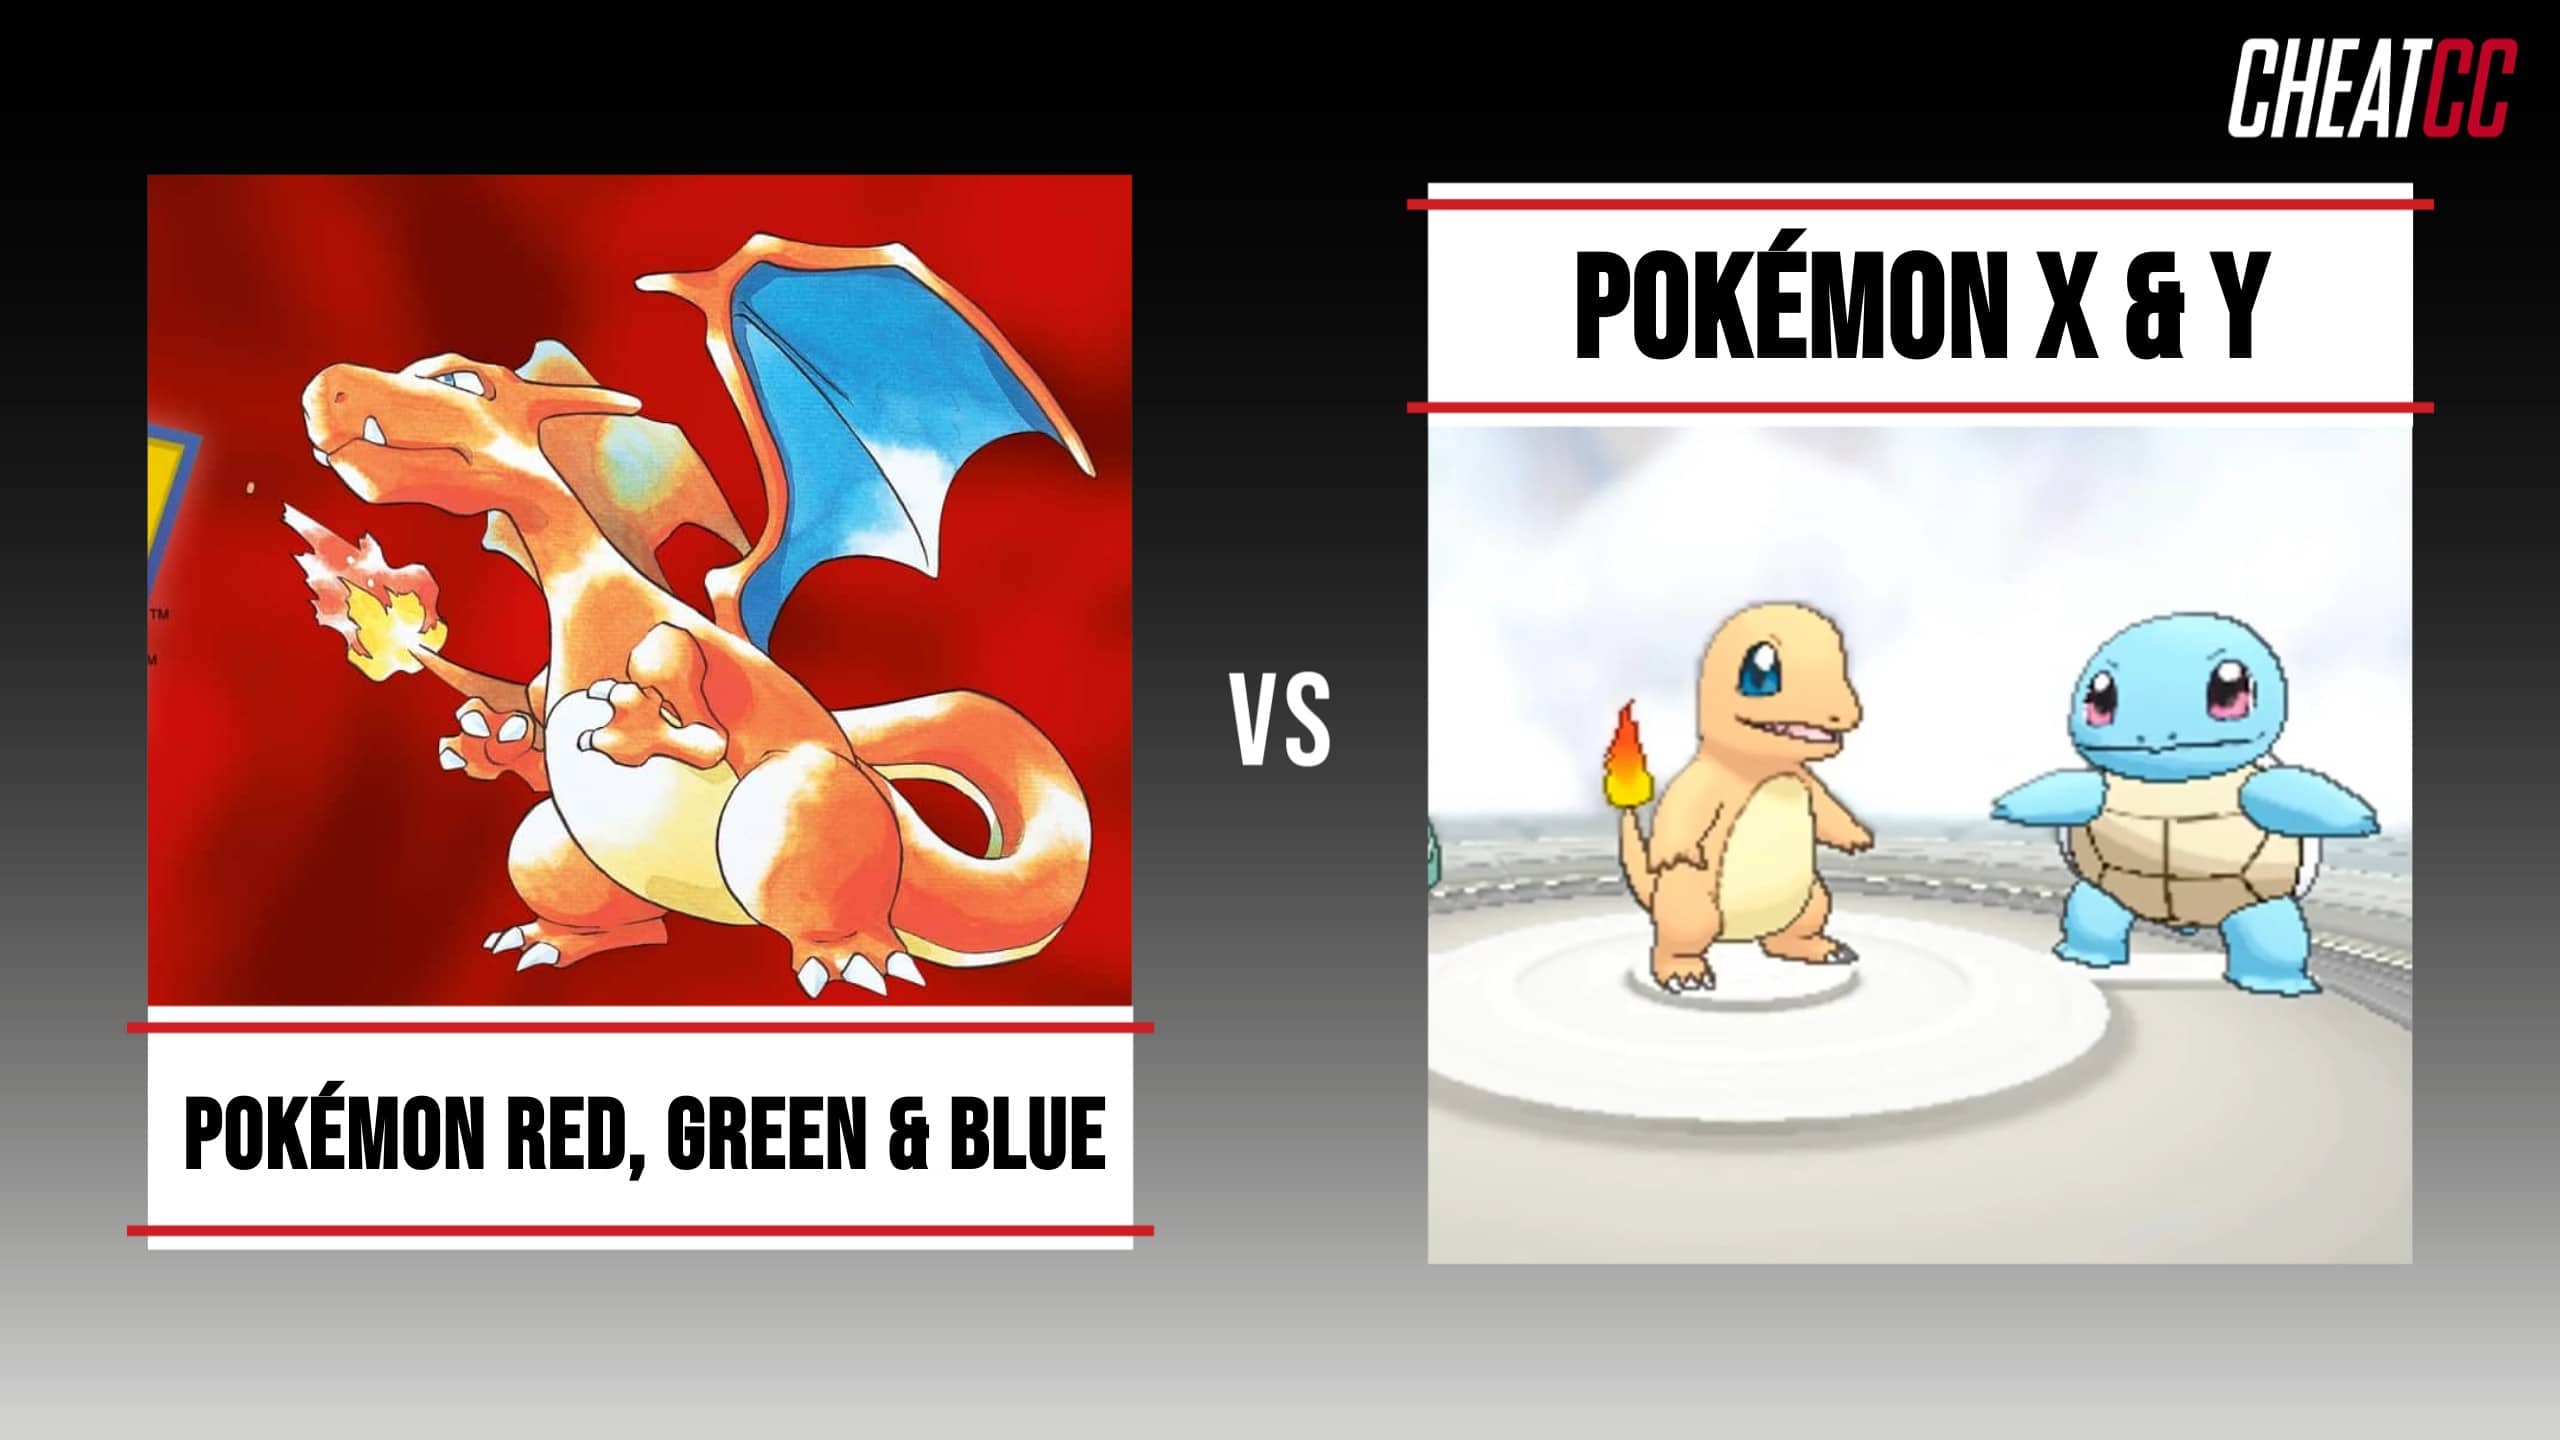 who do you think is better Charizard x or y (I think y is much